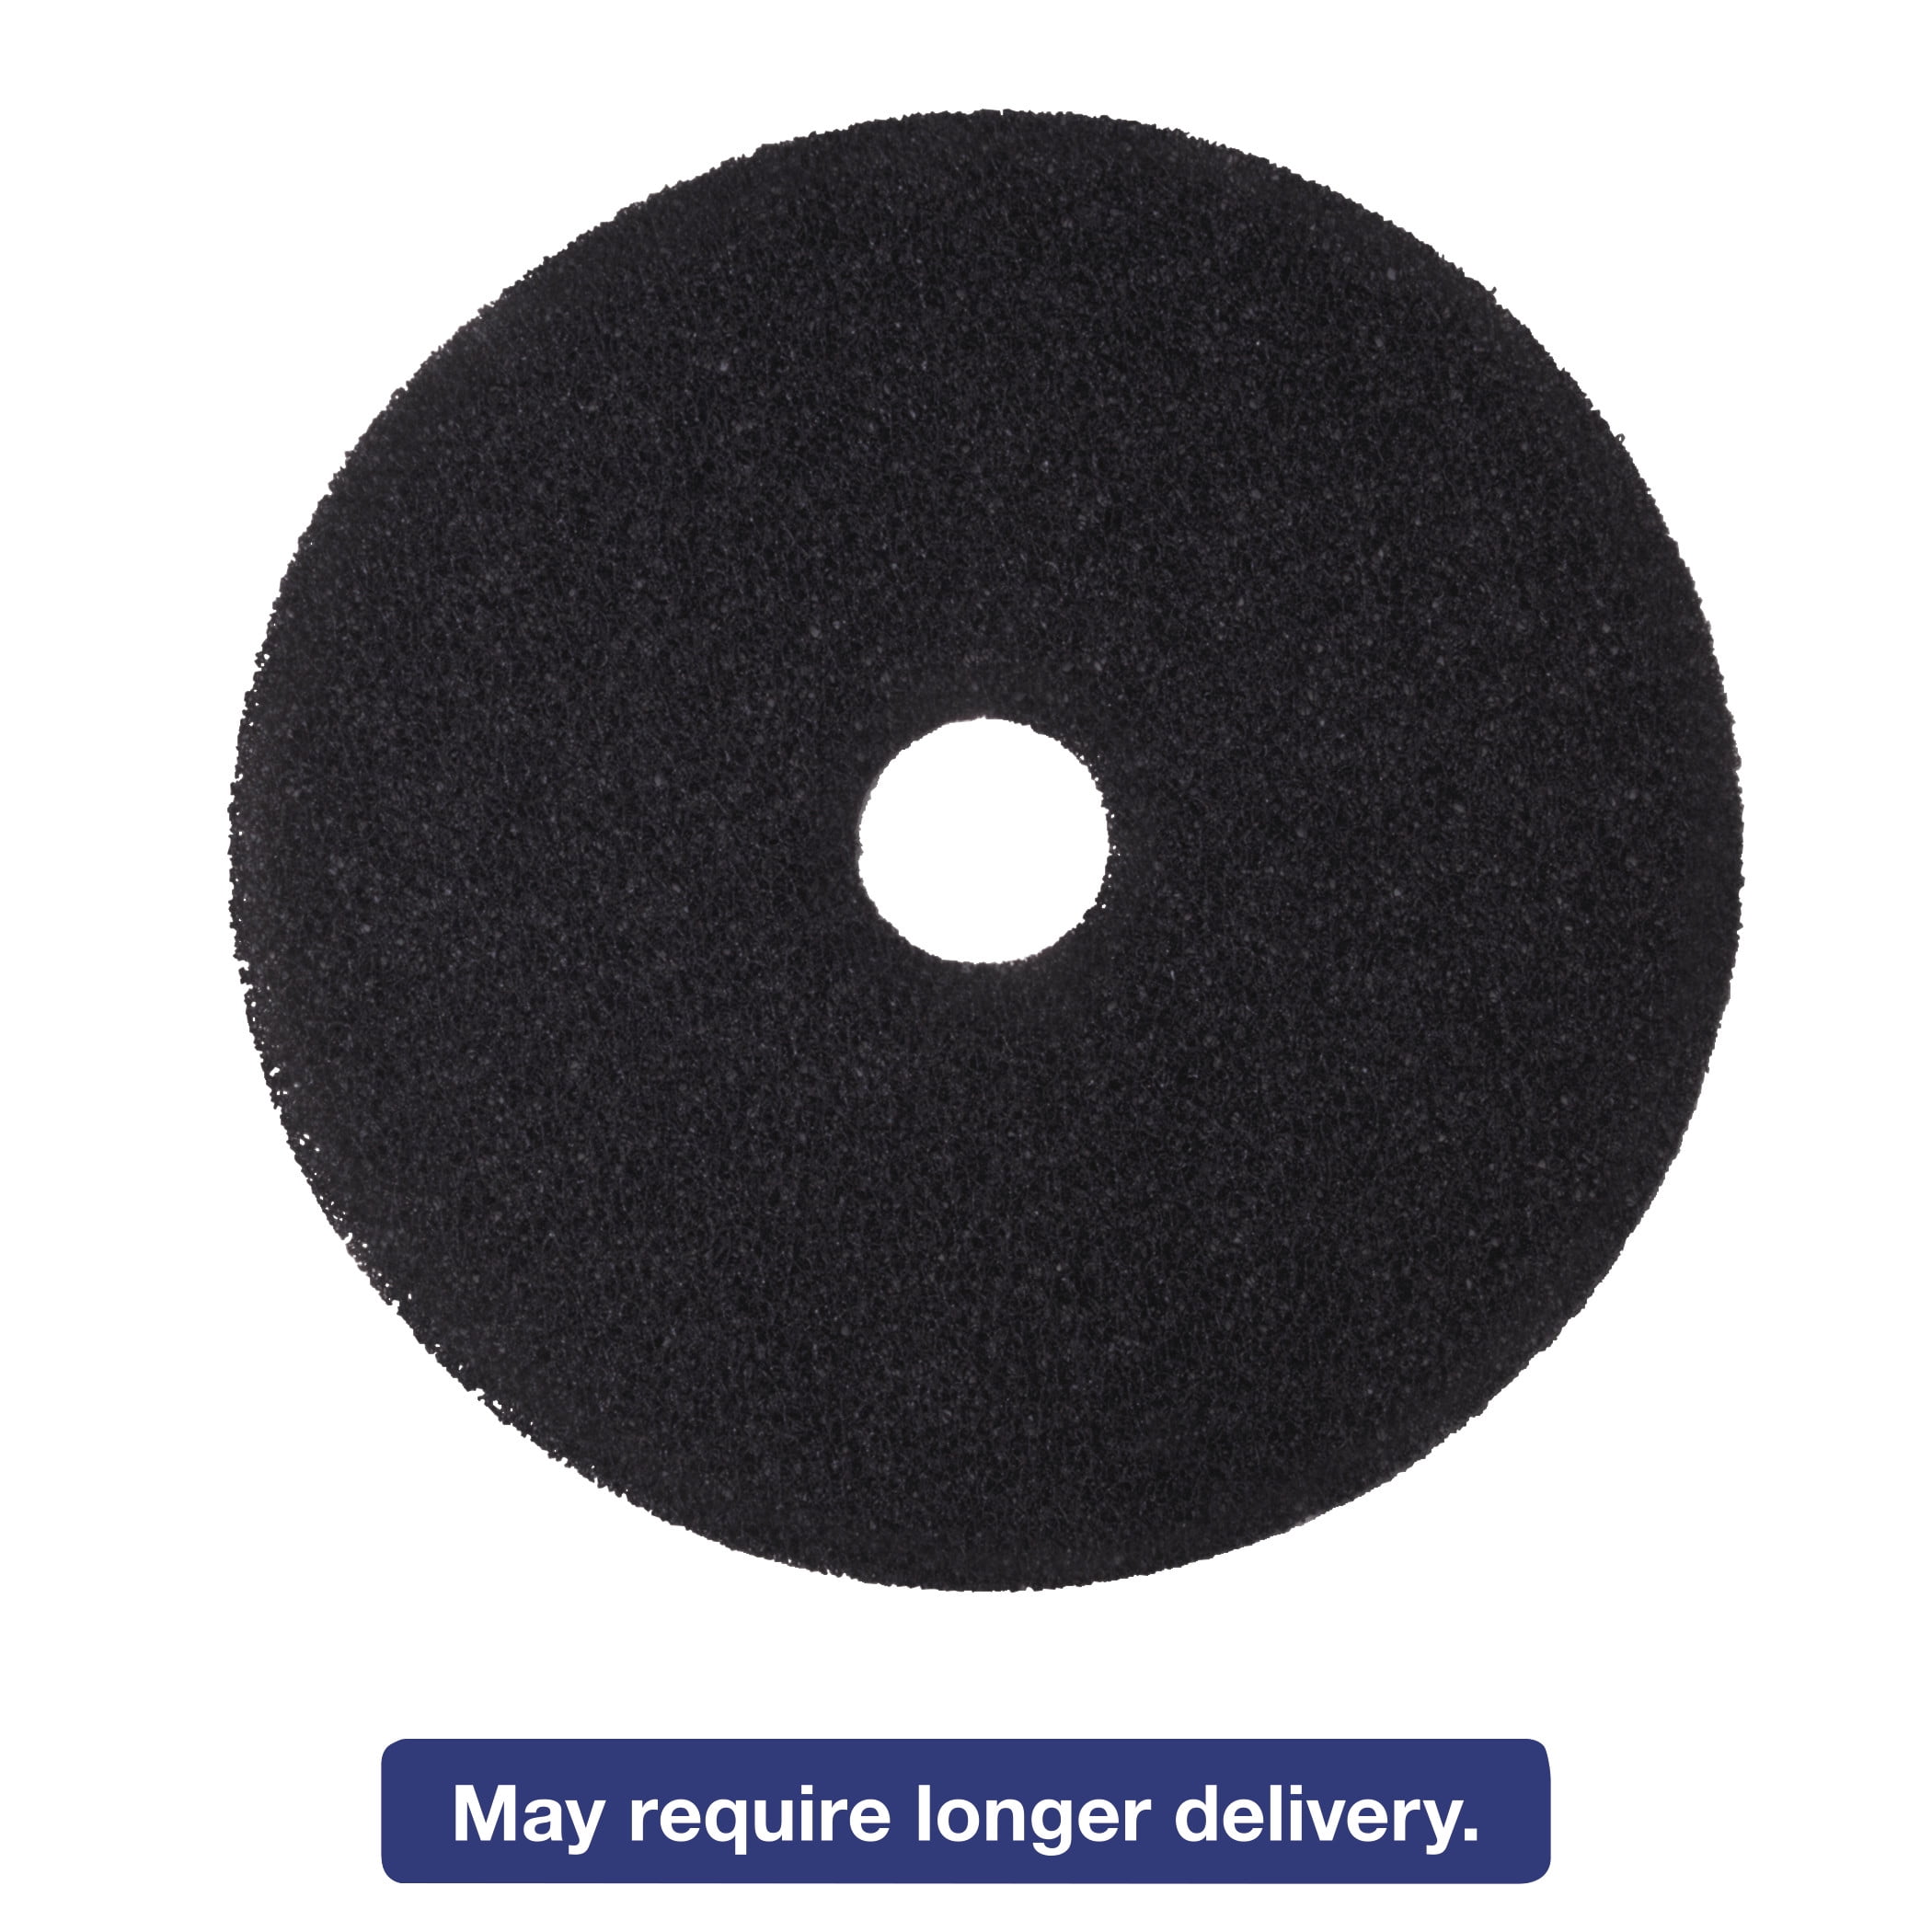 3M Black 17" Floor Stripping Pad 7200 Synthetic Fiber MMM08379 5 Pads 